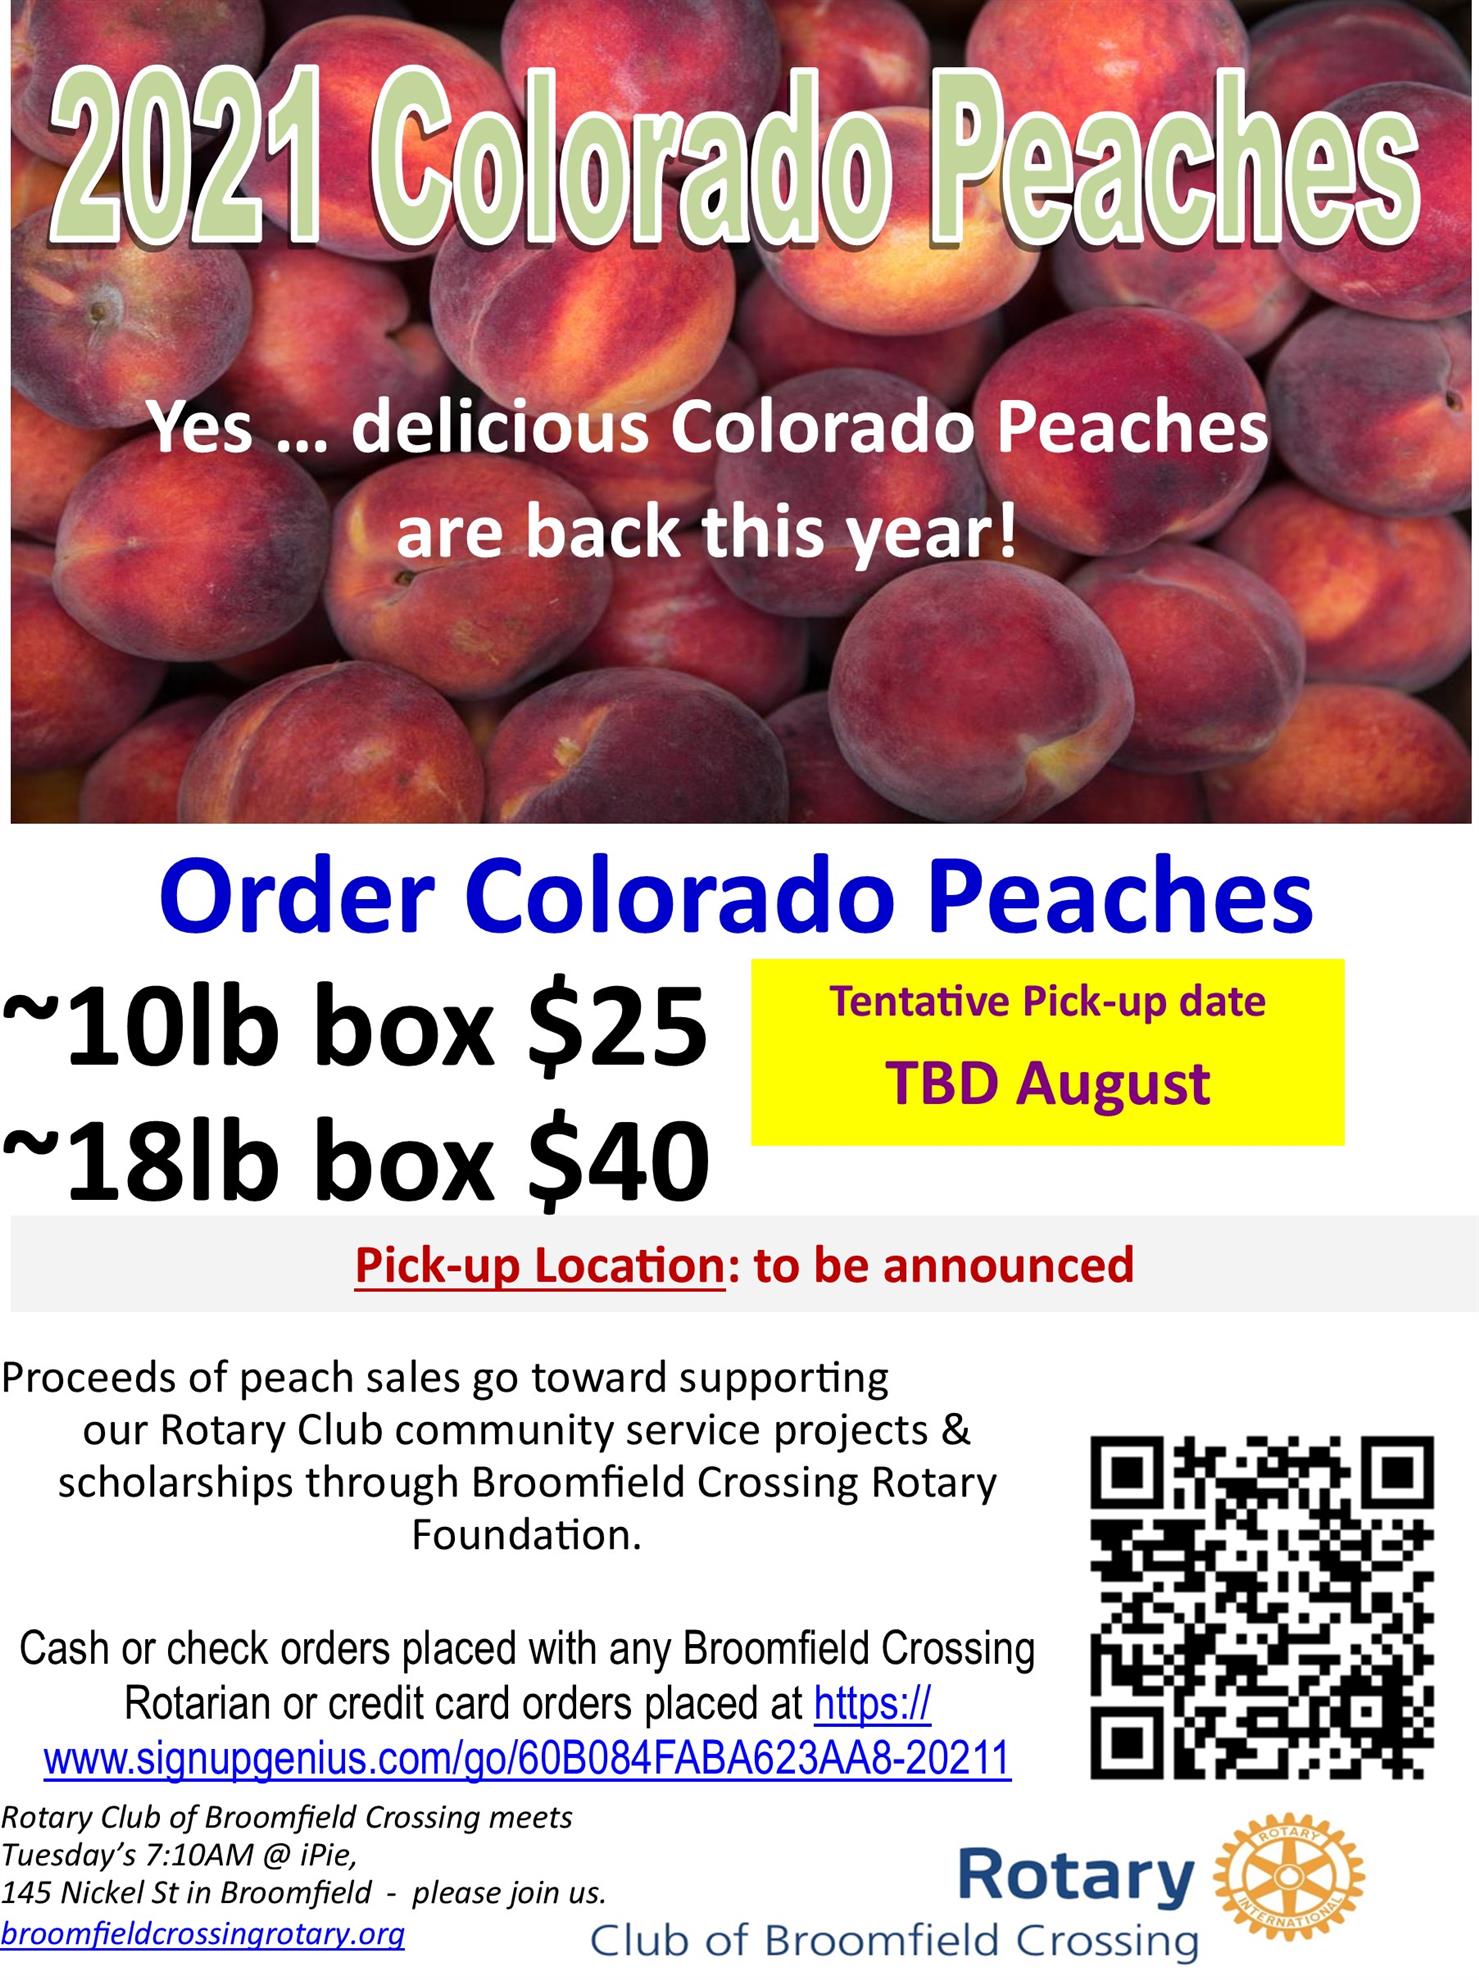 2021 Colorado Peaches For Sale Rotary Club of Broomfield Crossing